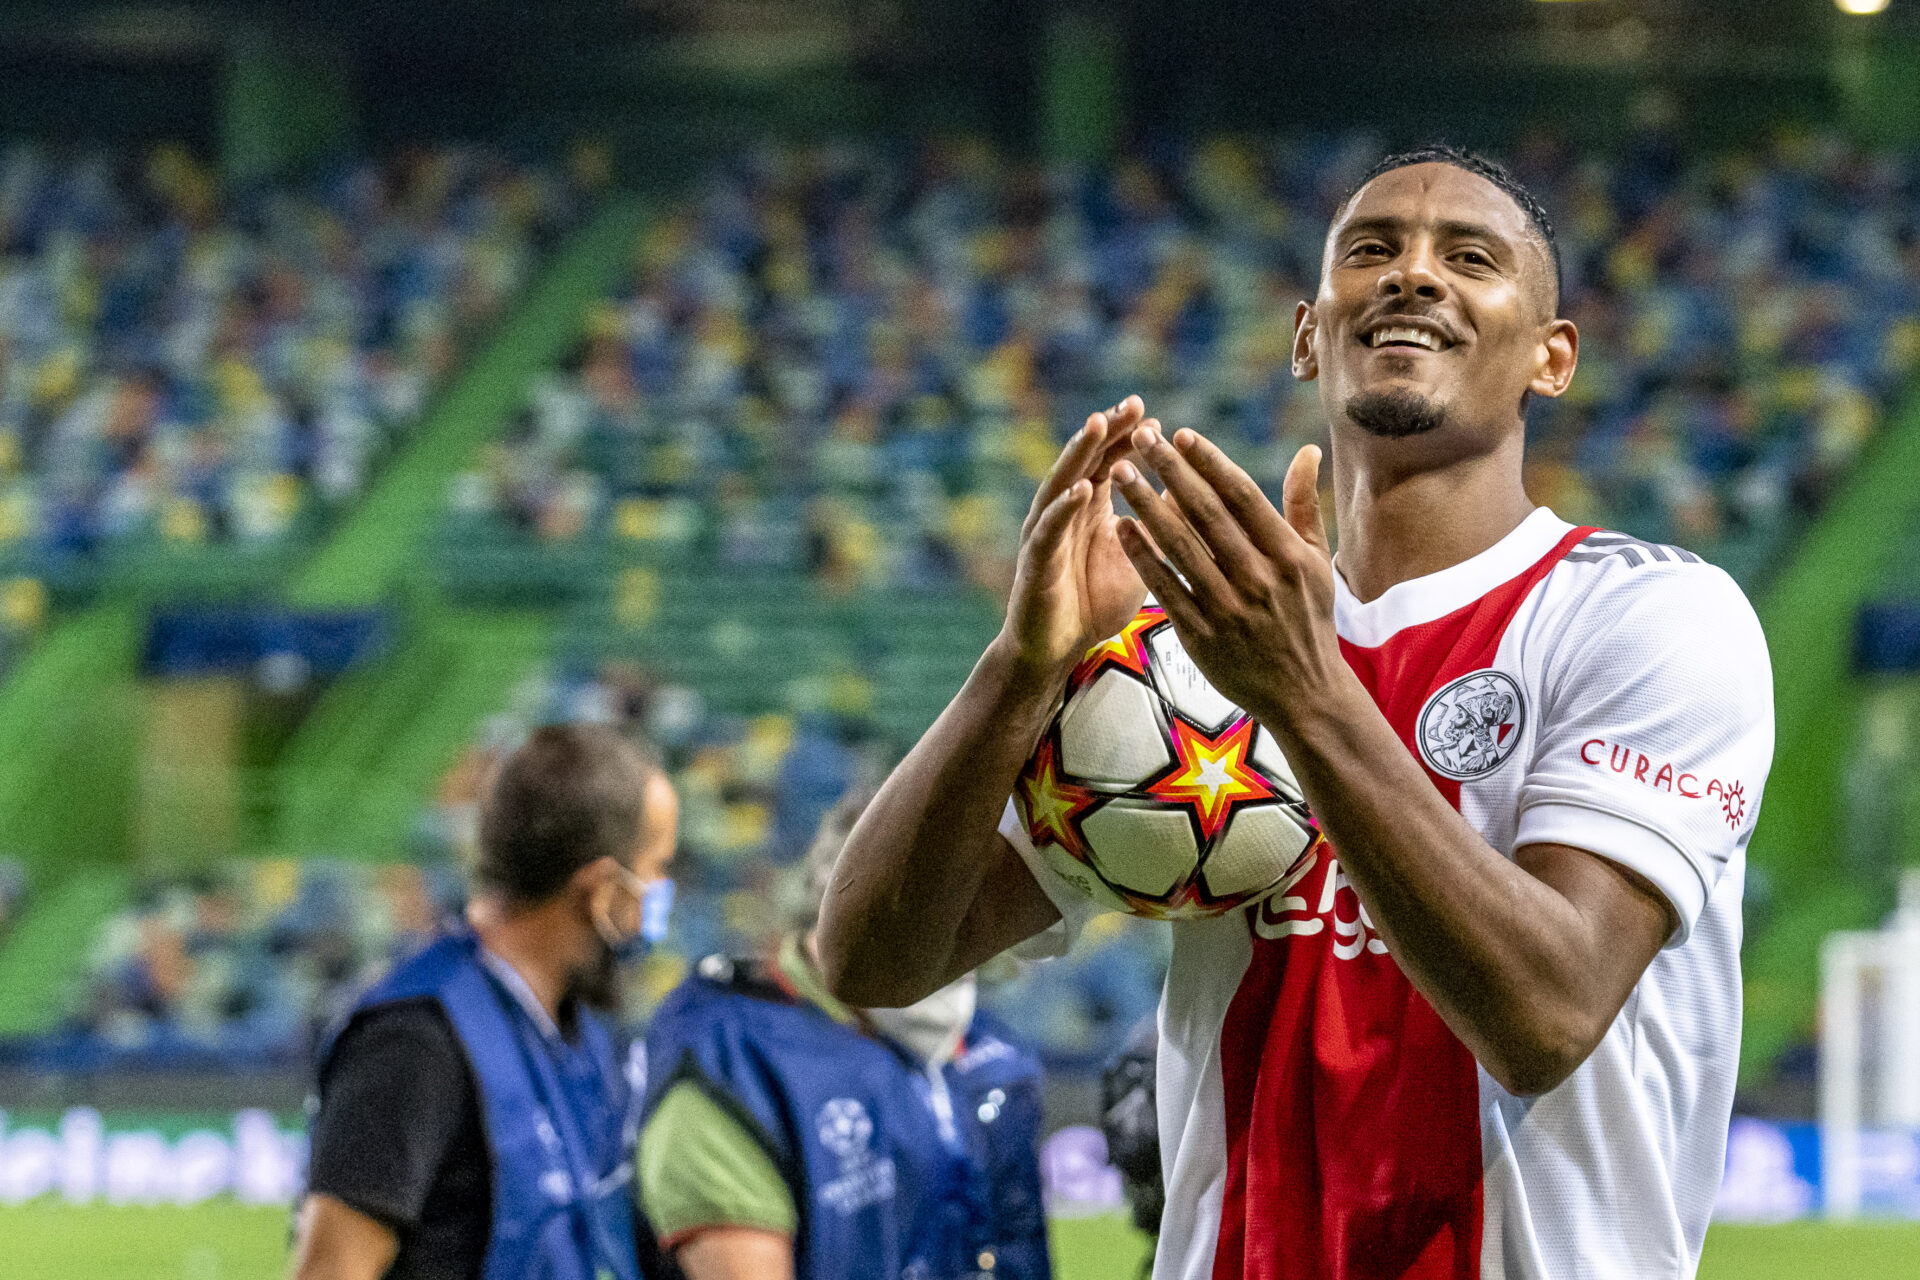 Sebastian Haller in the same row as the Ajax legends after the goal display in Portugal